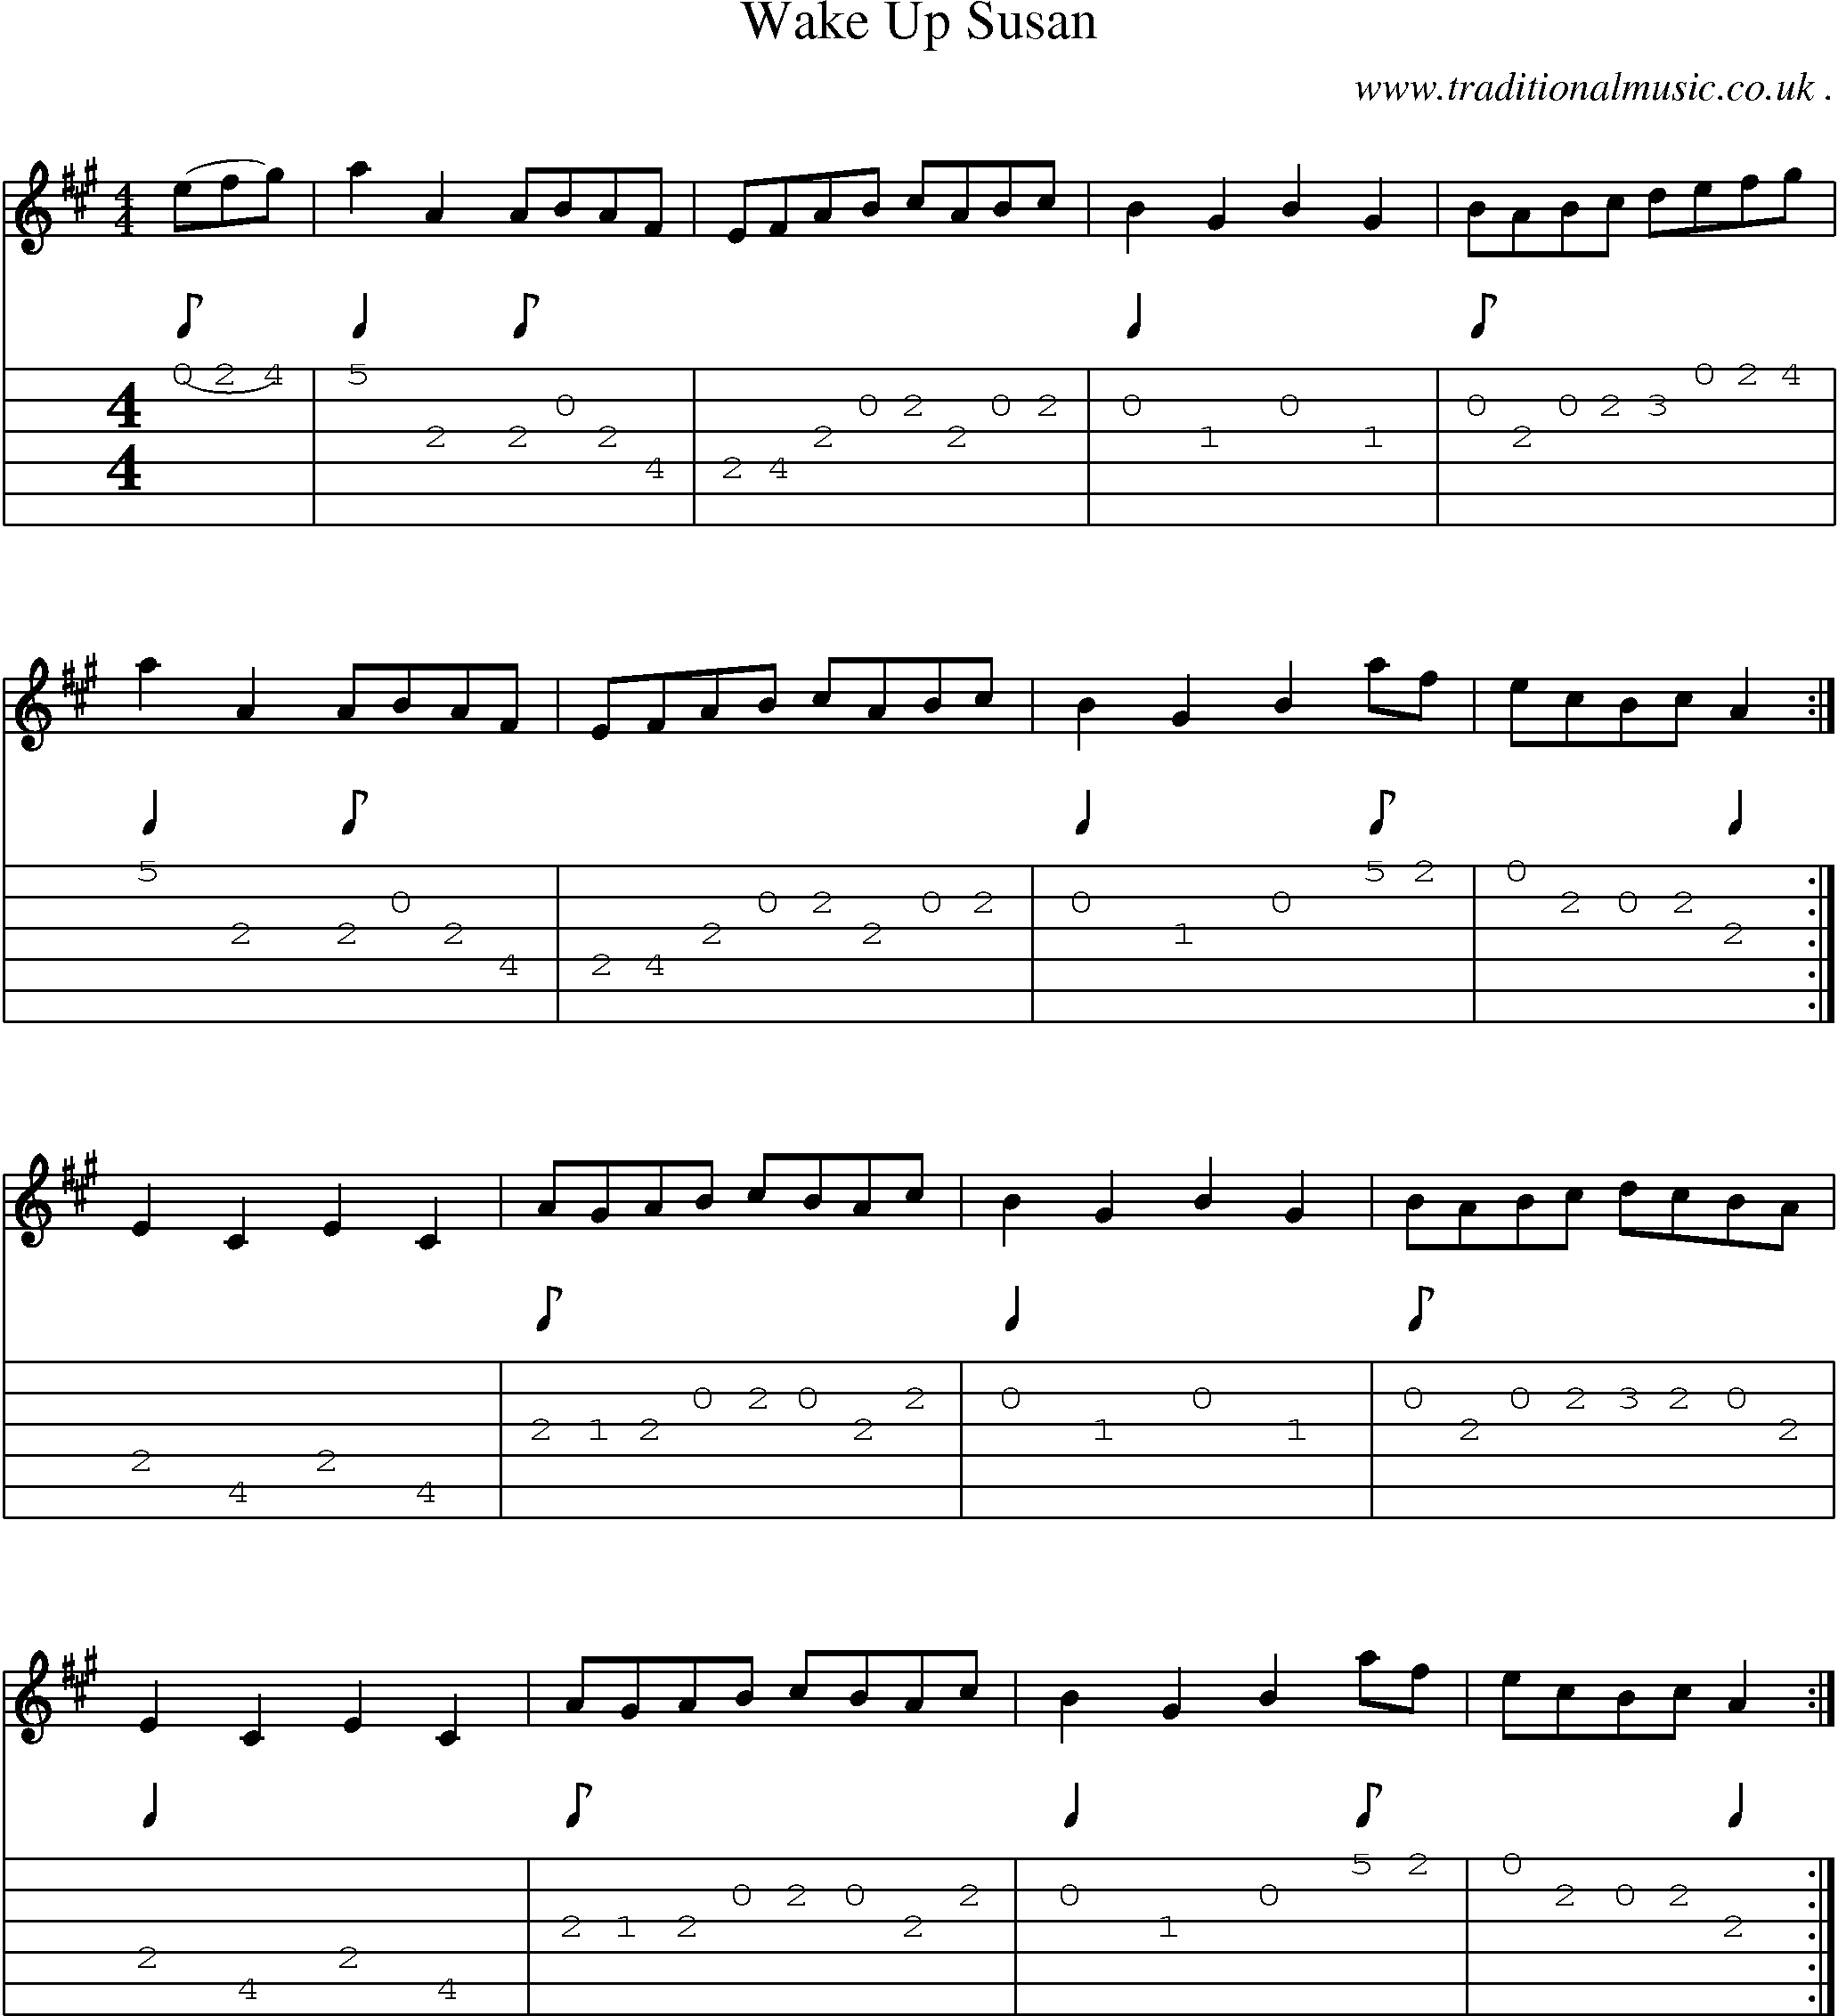 Music Score and Guitar Tabs for Wake Up Susan